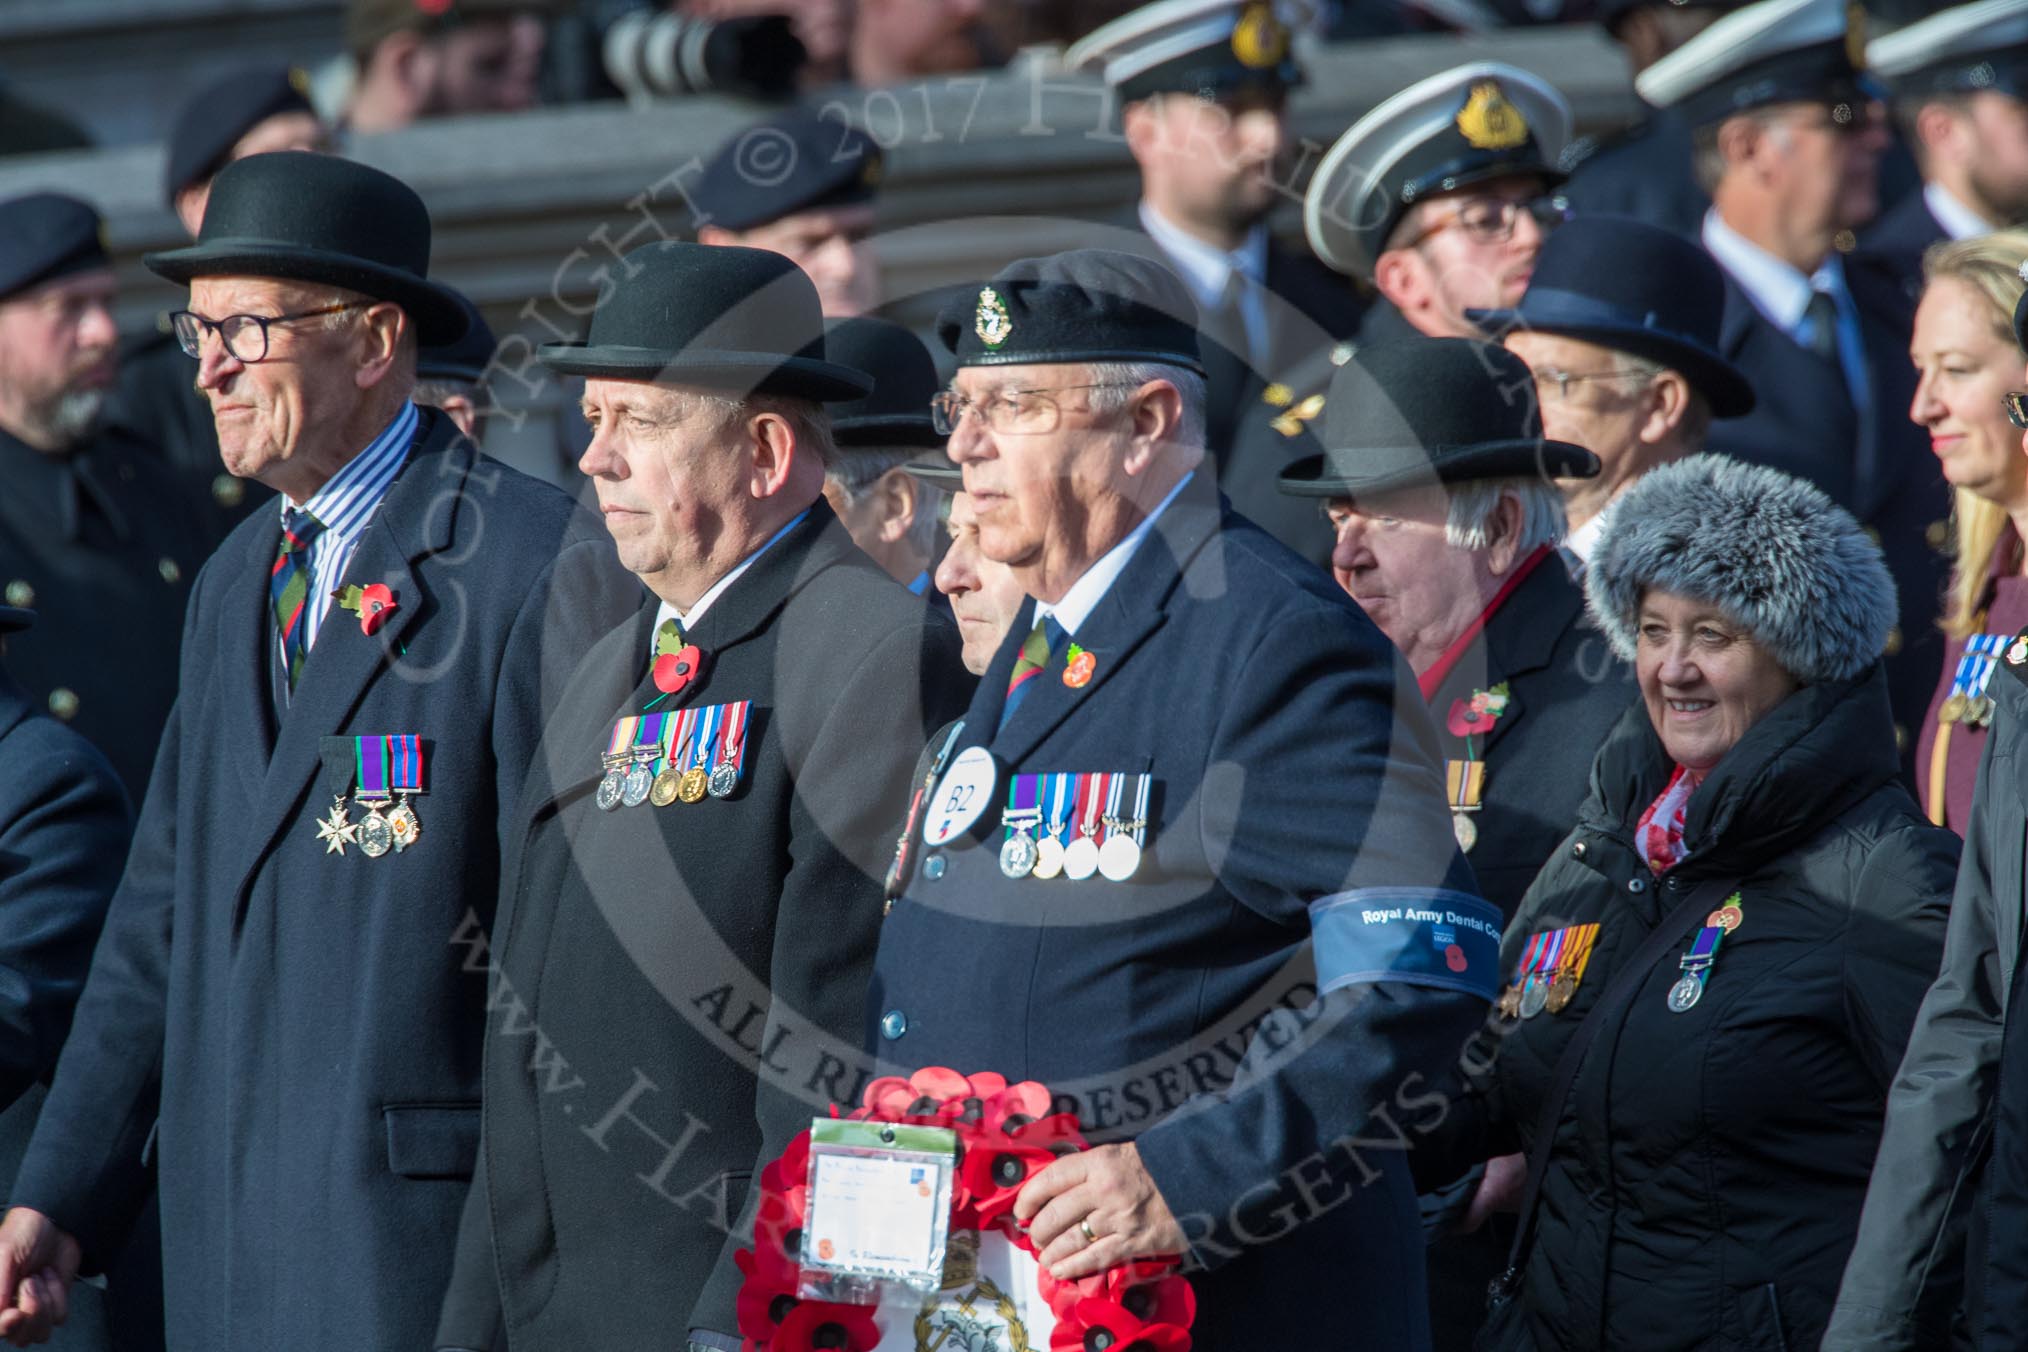 RAVC and RADC Associations (Group B2, 27 members) during the Royal British Legion March Past on Remembrance Sunday at the Cenotaph, Whitehall, Westminster, London, 11 November 2018, 12:05.